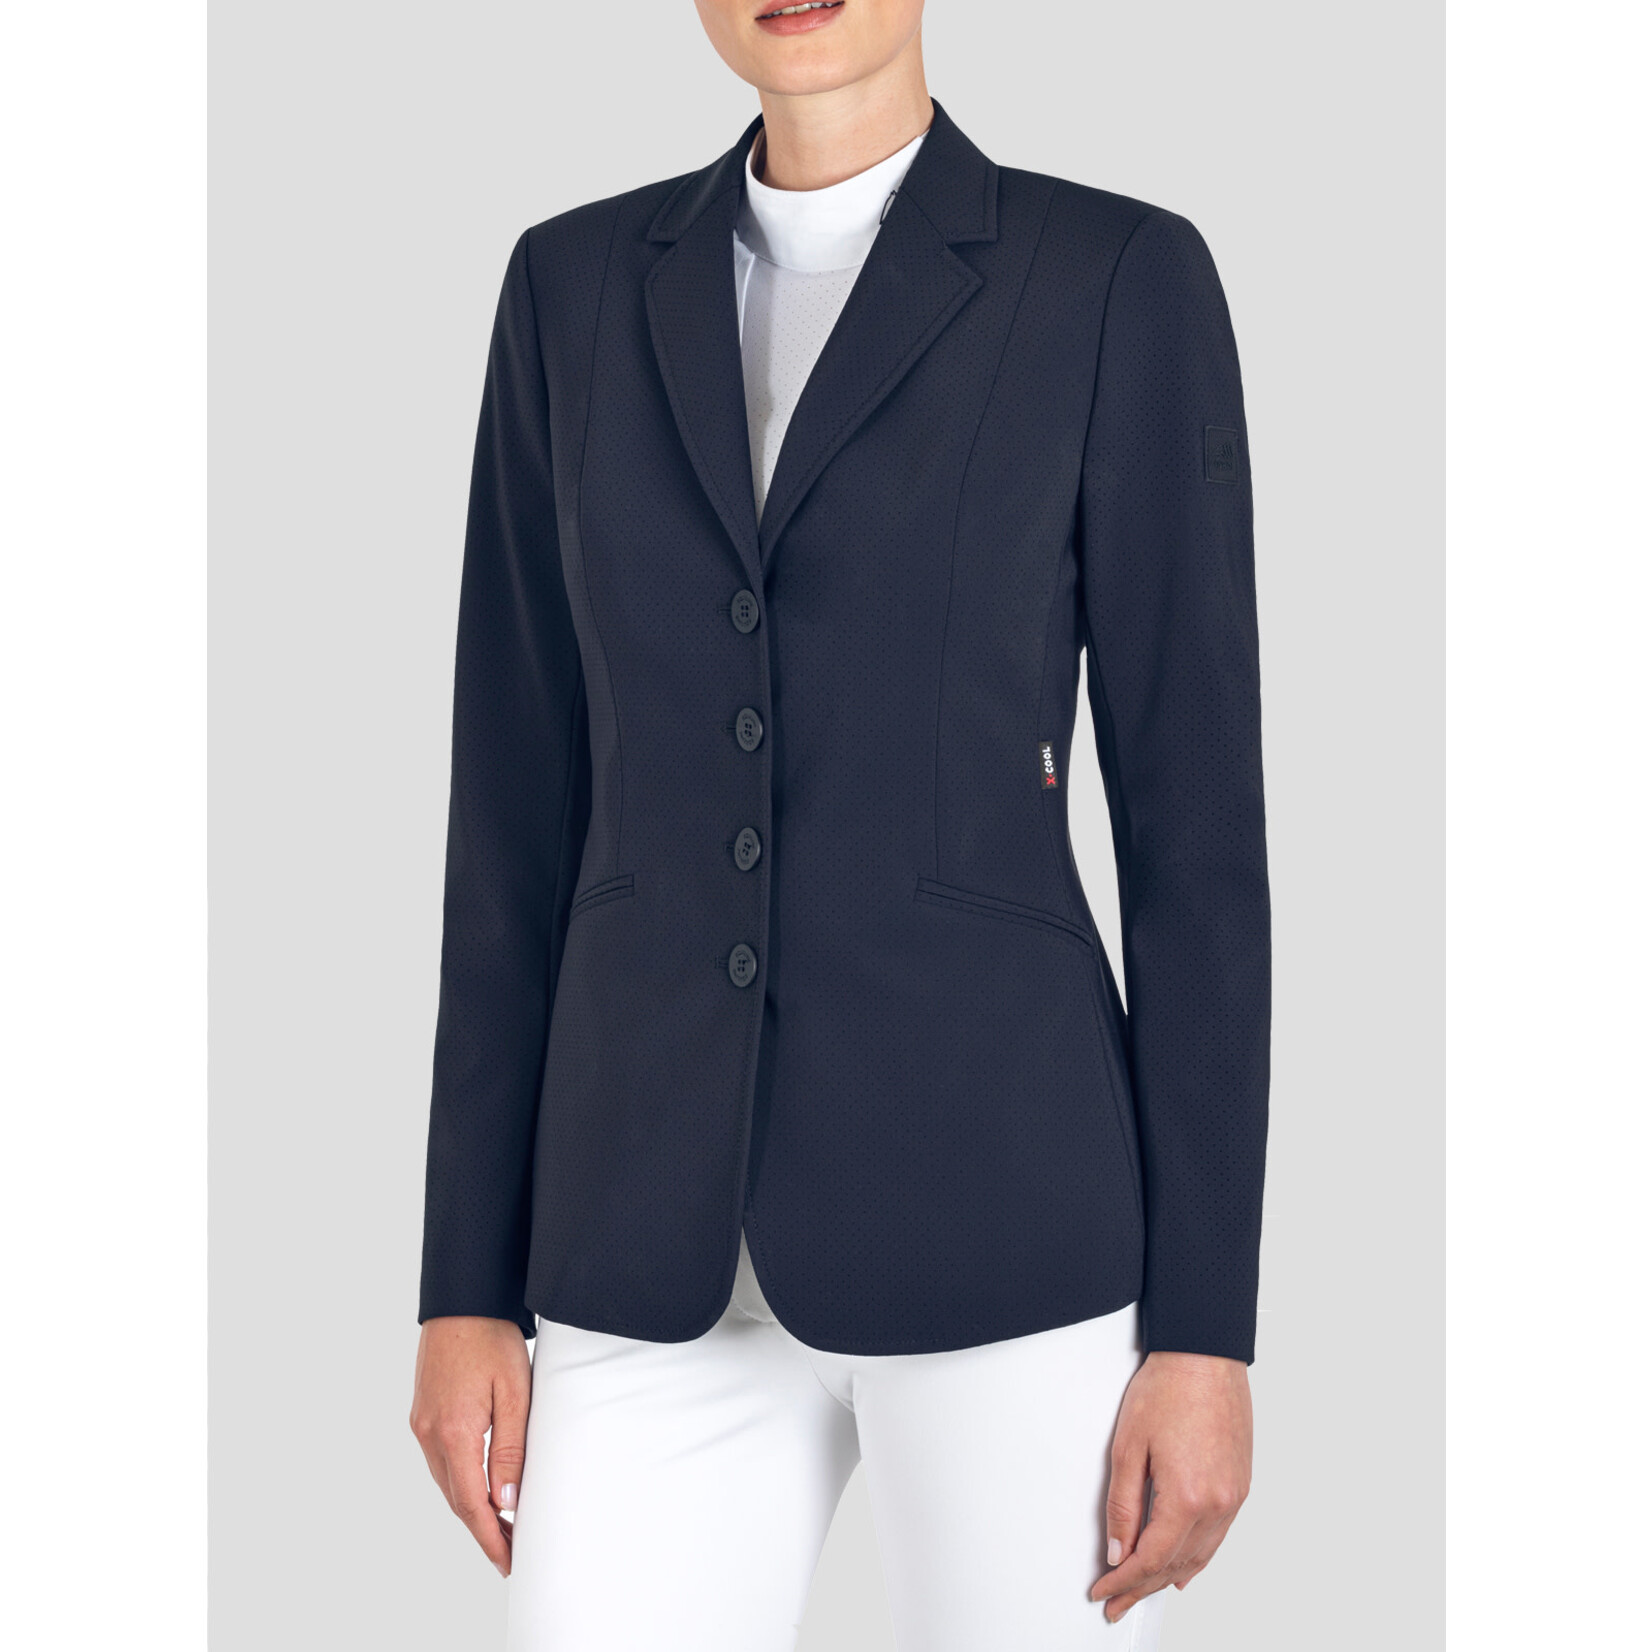 Equiline Equiline Caback Women's Micro Perforated Show Jacket